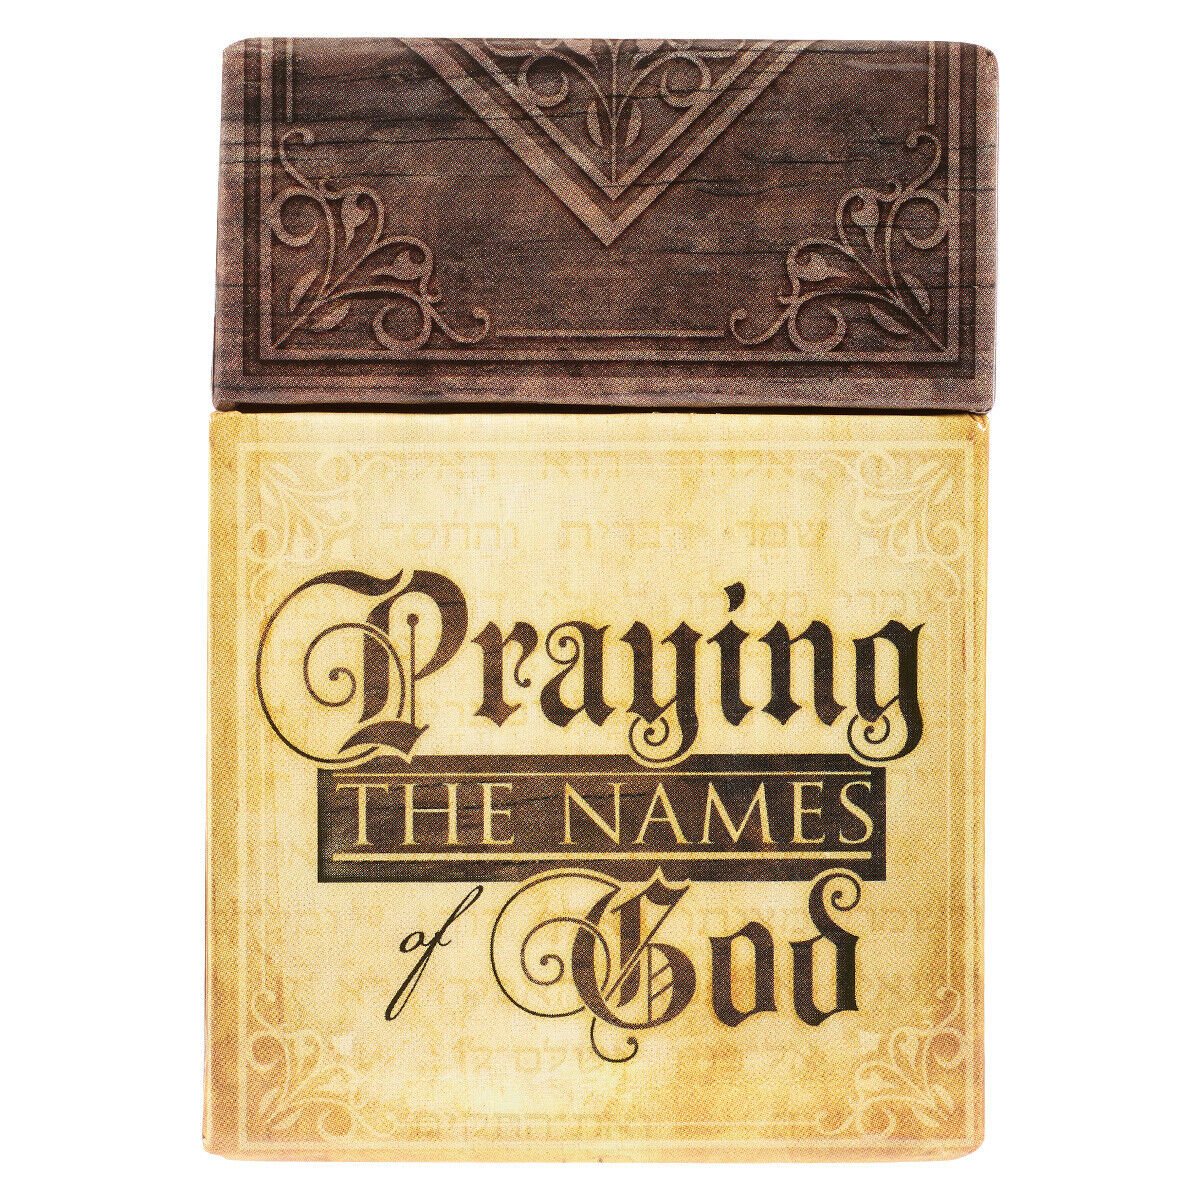 Praying the Names of God, Inspirational Scripture Cards to Keep or Share